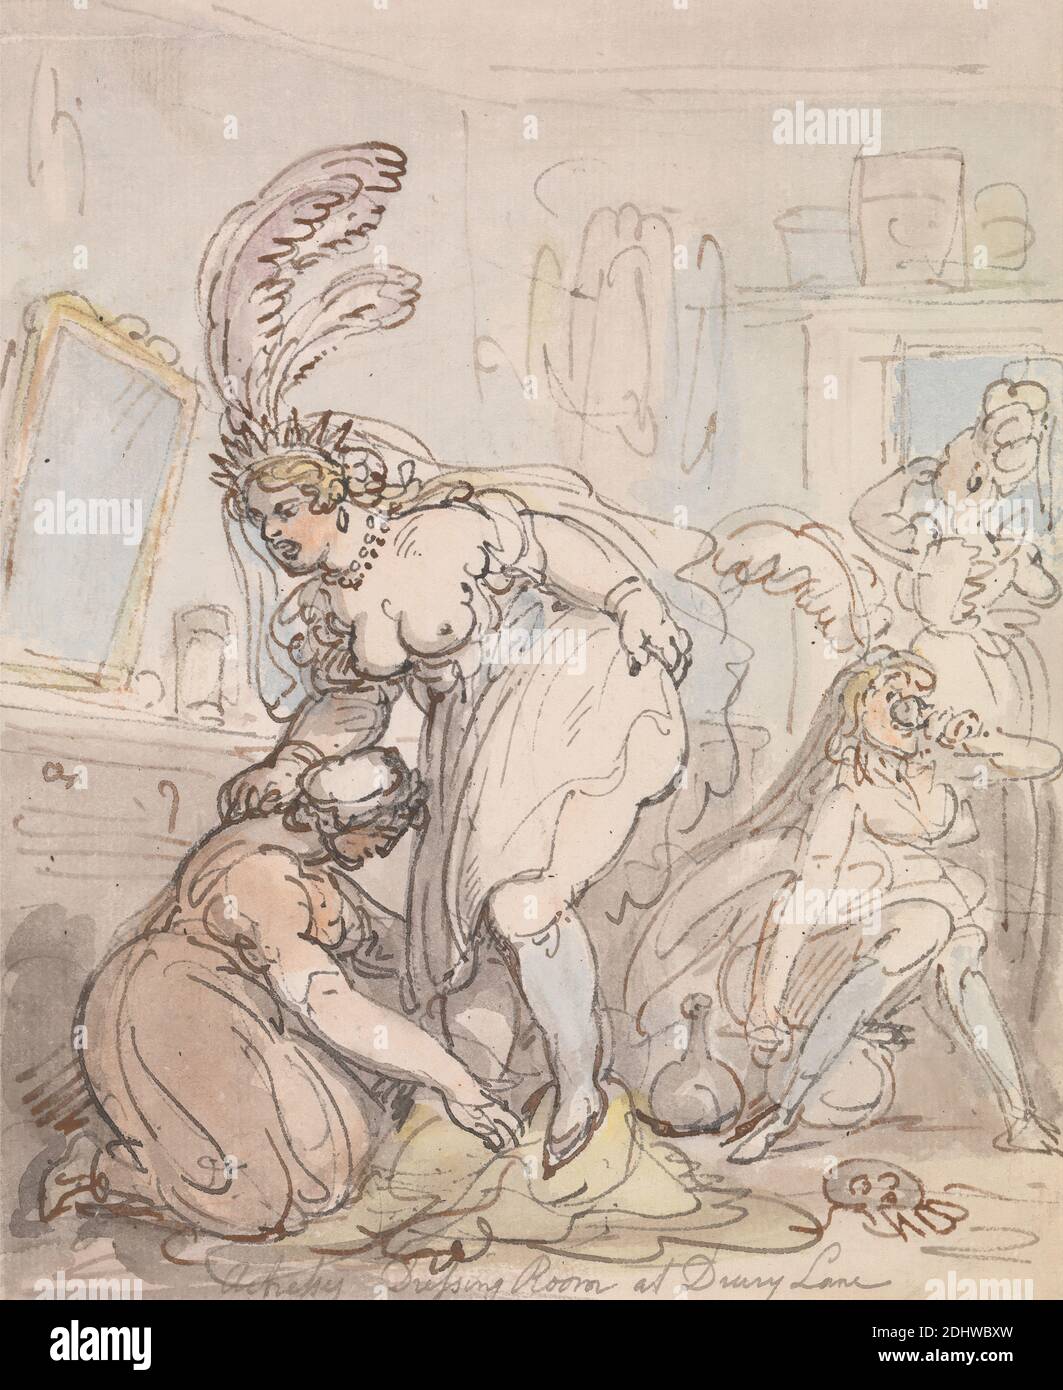 The Actresses Dressing Room at Drury Lane, Thomas Rowlandson, 1756–1827, British, between 1800 and 1810, Watercolor with pen and red-brown and gray ink, over graphite on medium, moderately textured, blued white, laid paper, Sheet: 7 3/8 x 6 inches (18.7 x 15.2 cm), actresses, dresses, dressing room, drinking, Feathers, food, genre subject, mirror, vanity, Covent Garden, Drury Lane, England, Europe, Greater London, London, United Kingdom, Westminster Stock Photo